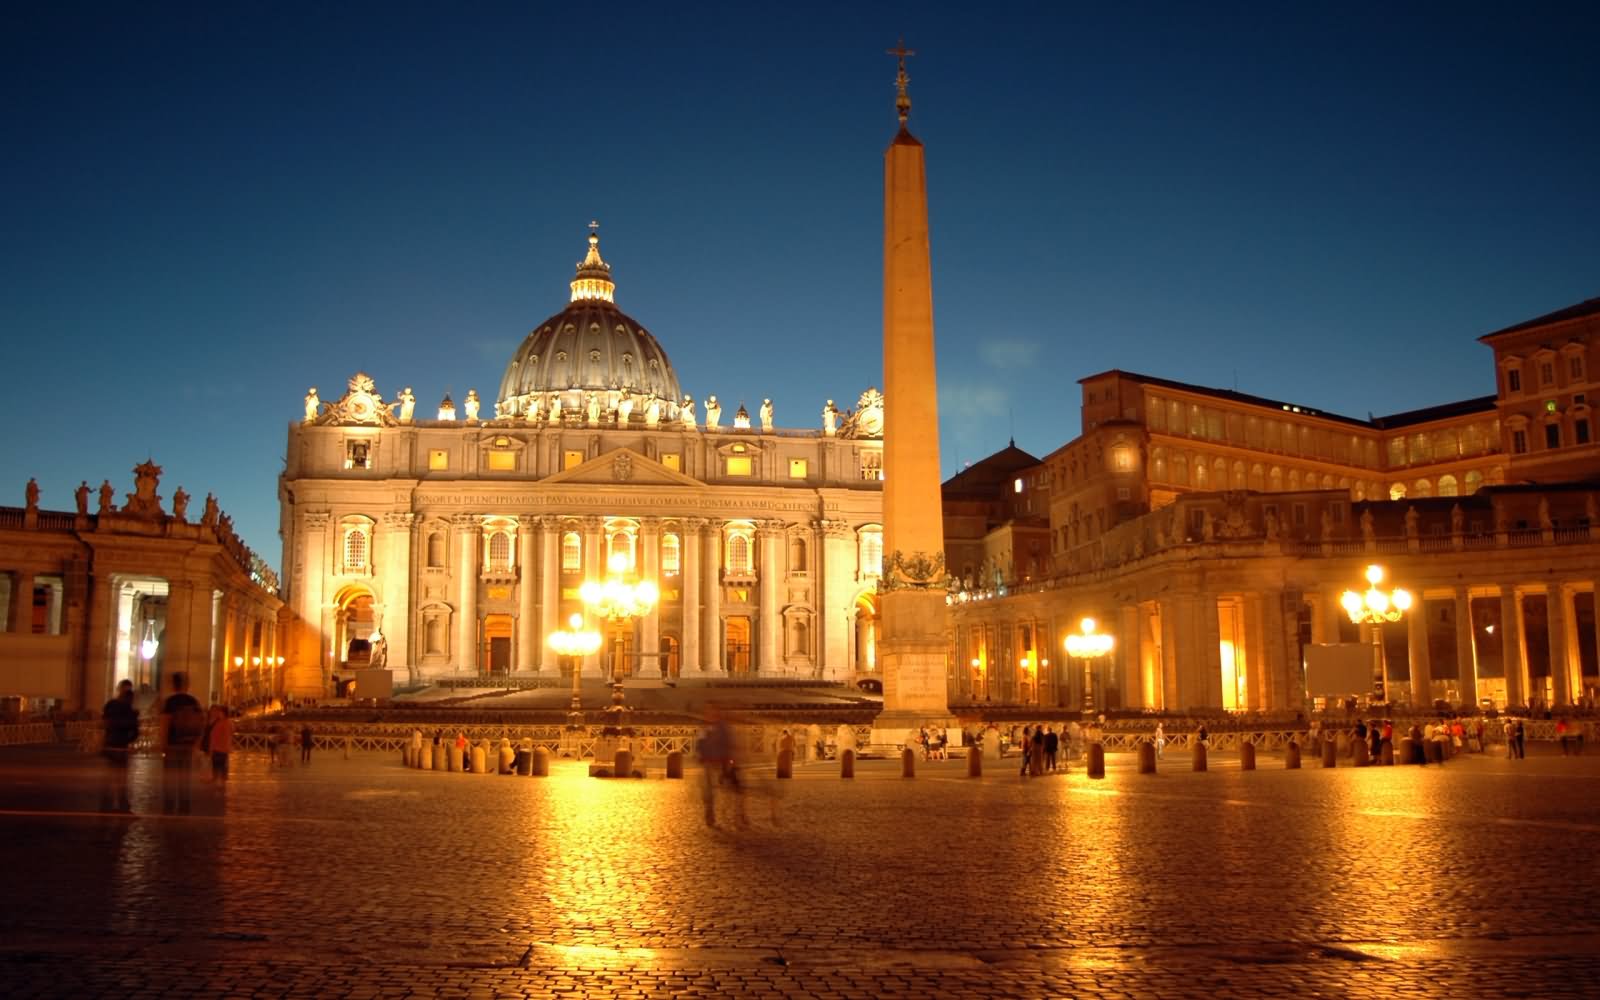 St. Peter's Basilica Square Night View Picture